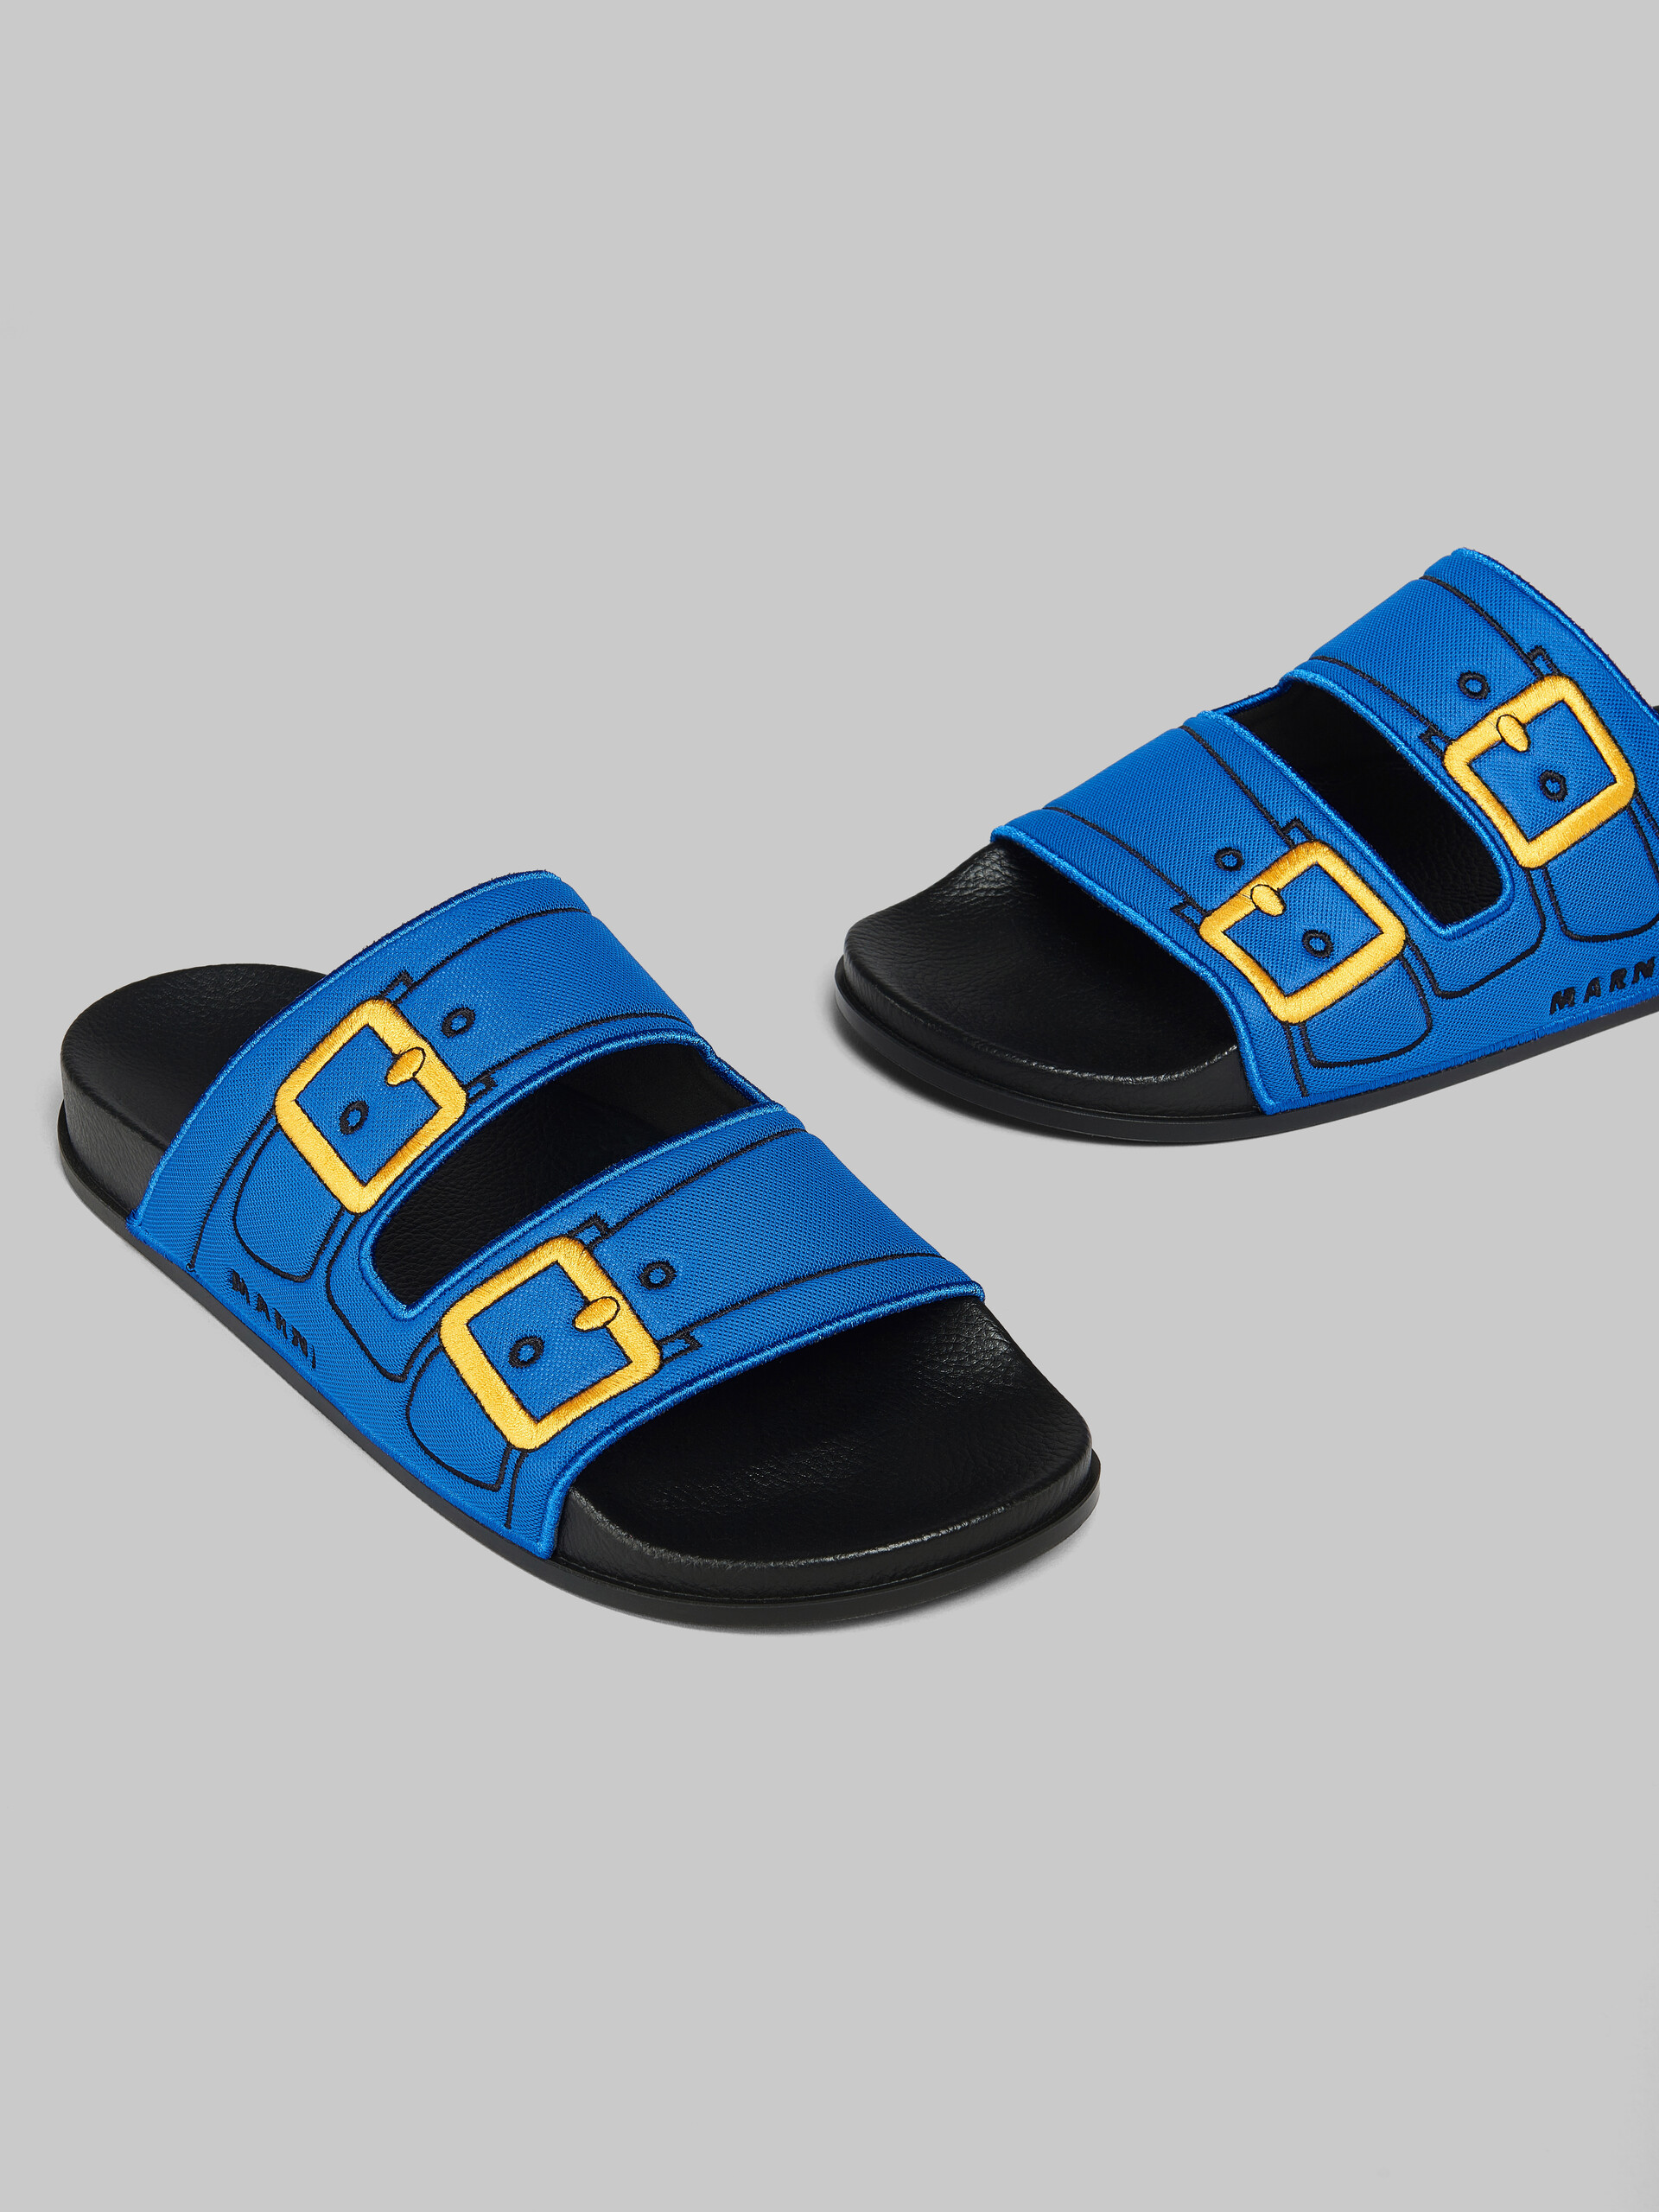 Blue trompe l'oeil slider with embroidered buckles - Sandals - Image 5